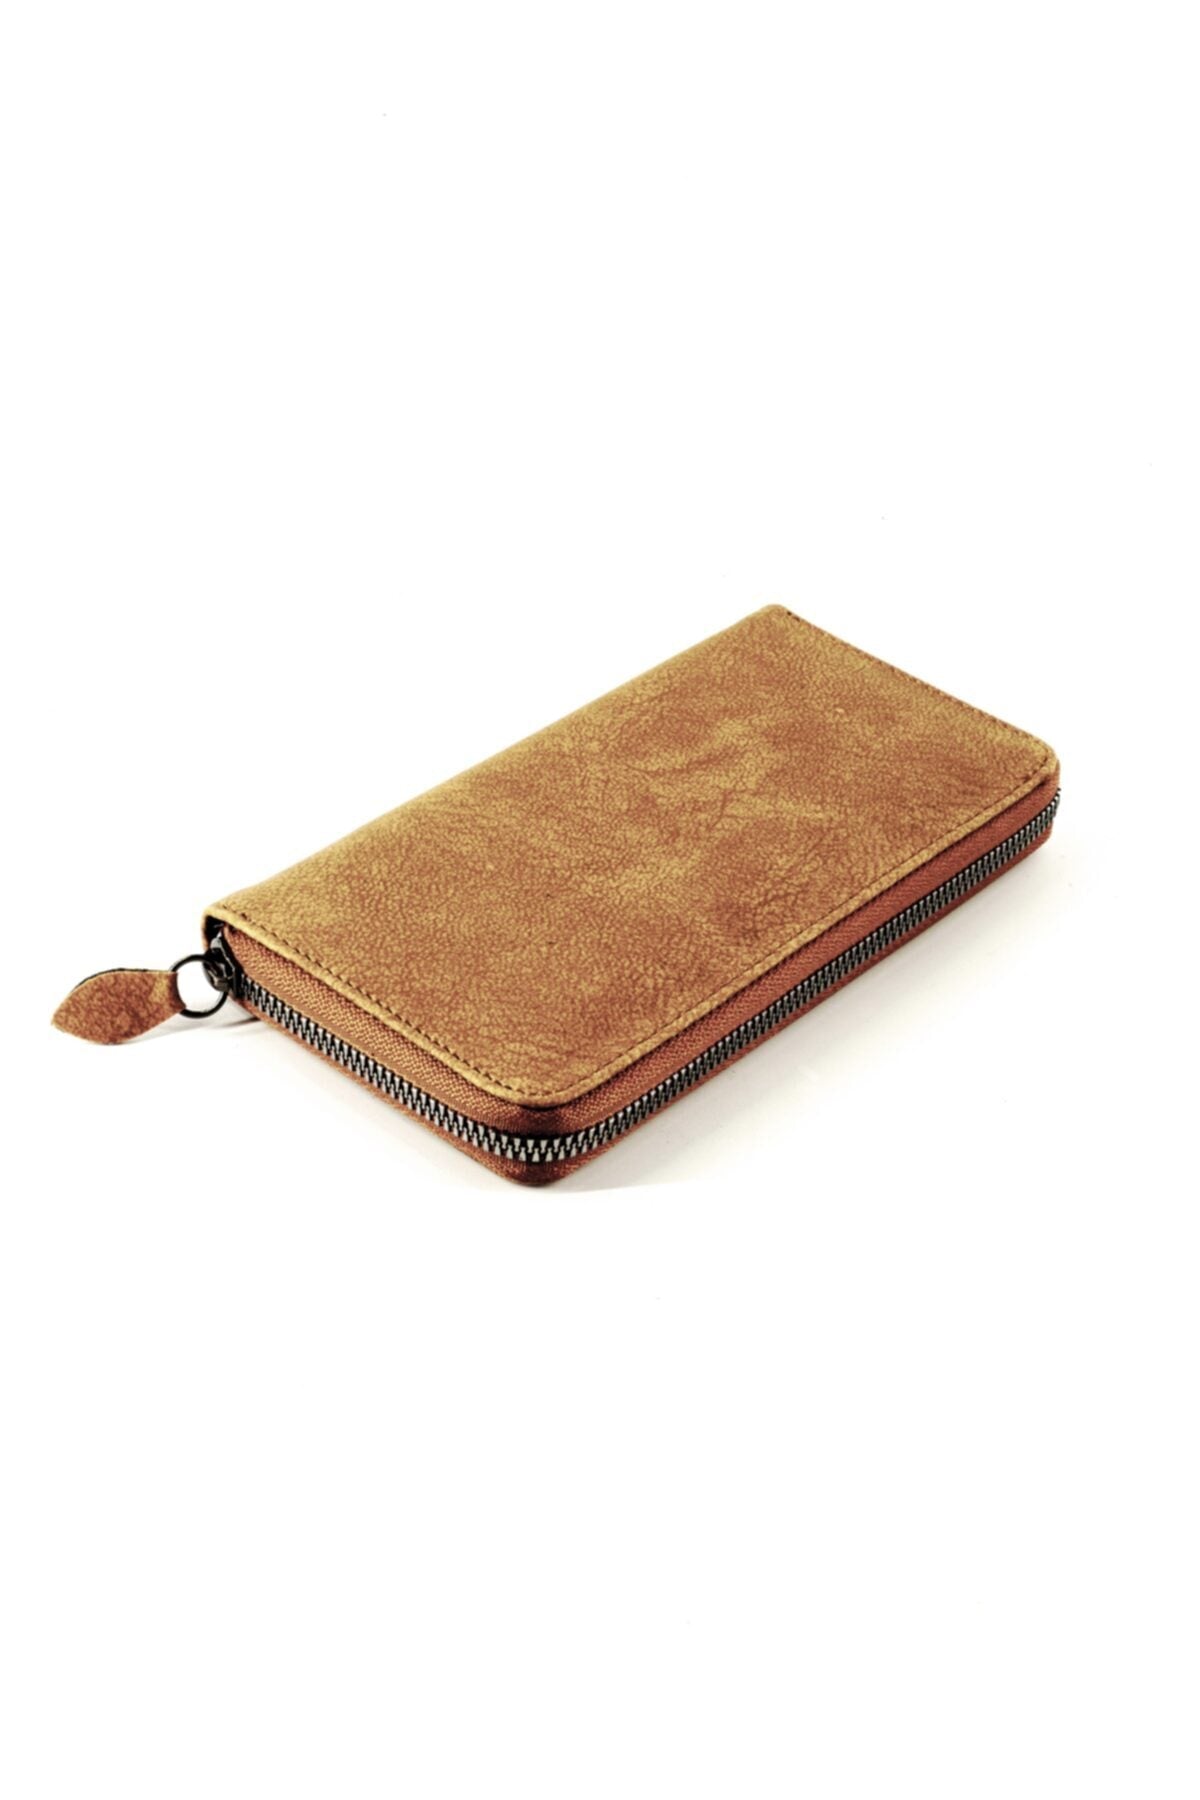 Unisex Vegan Leather Card Holder Wallet with Phone Compartment Xclub Model